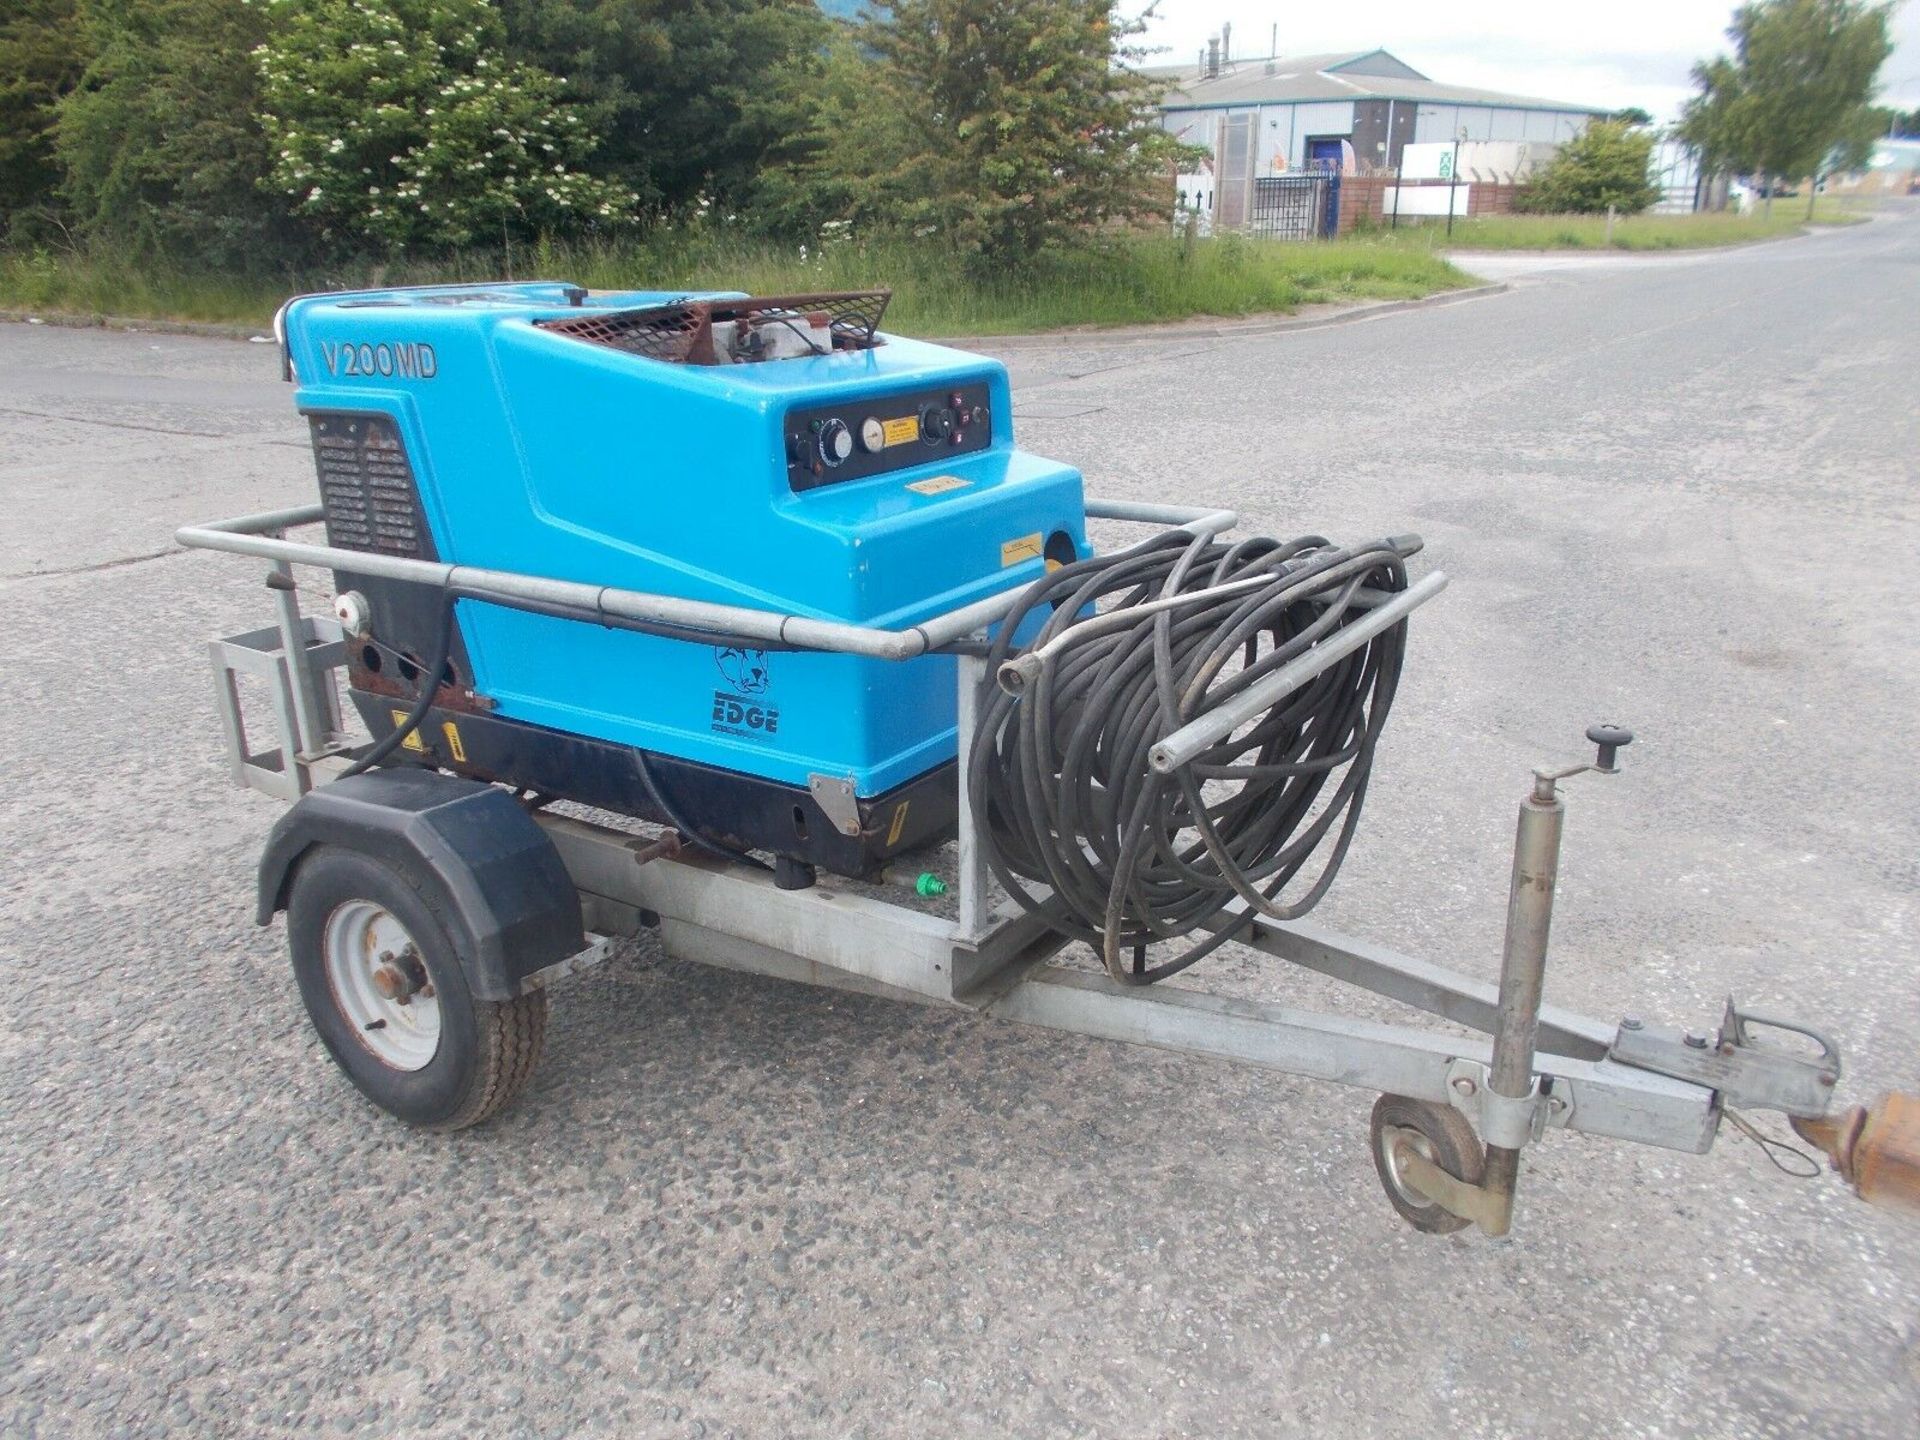 Edge V 200 MD Towable Hot and Cold Diesel Engined Pressure Washer